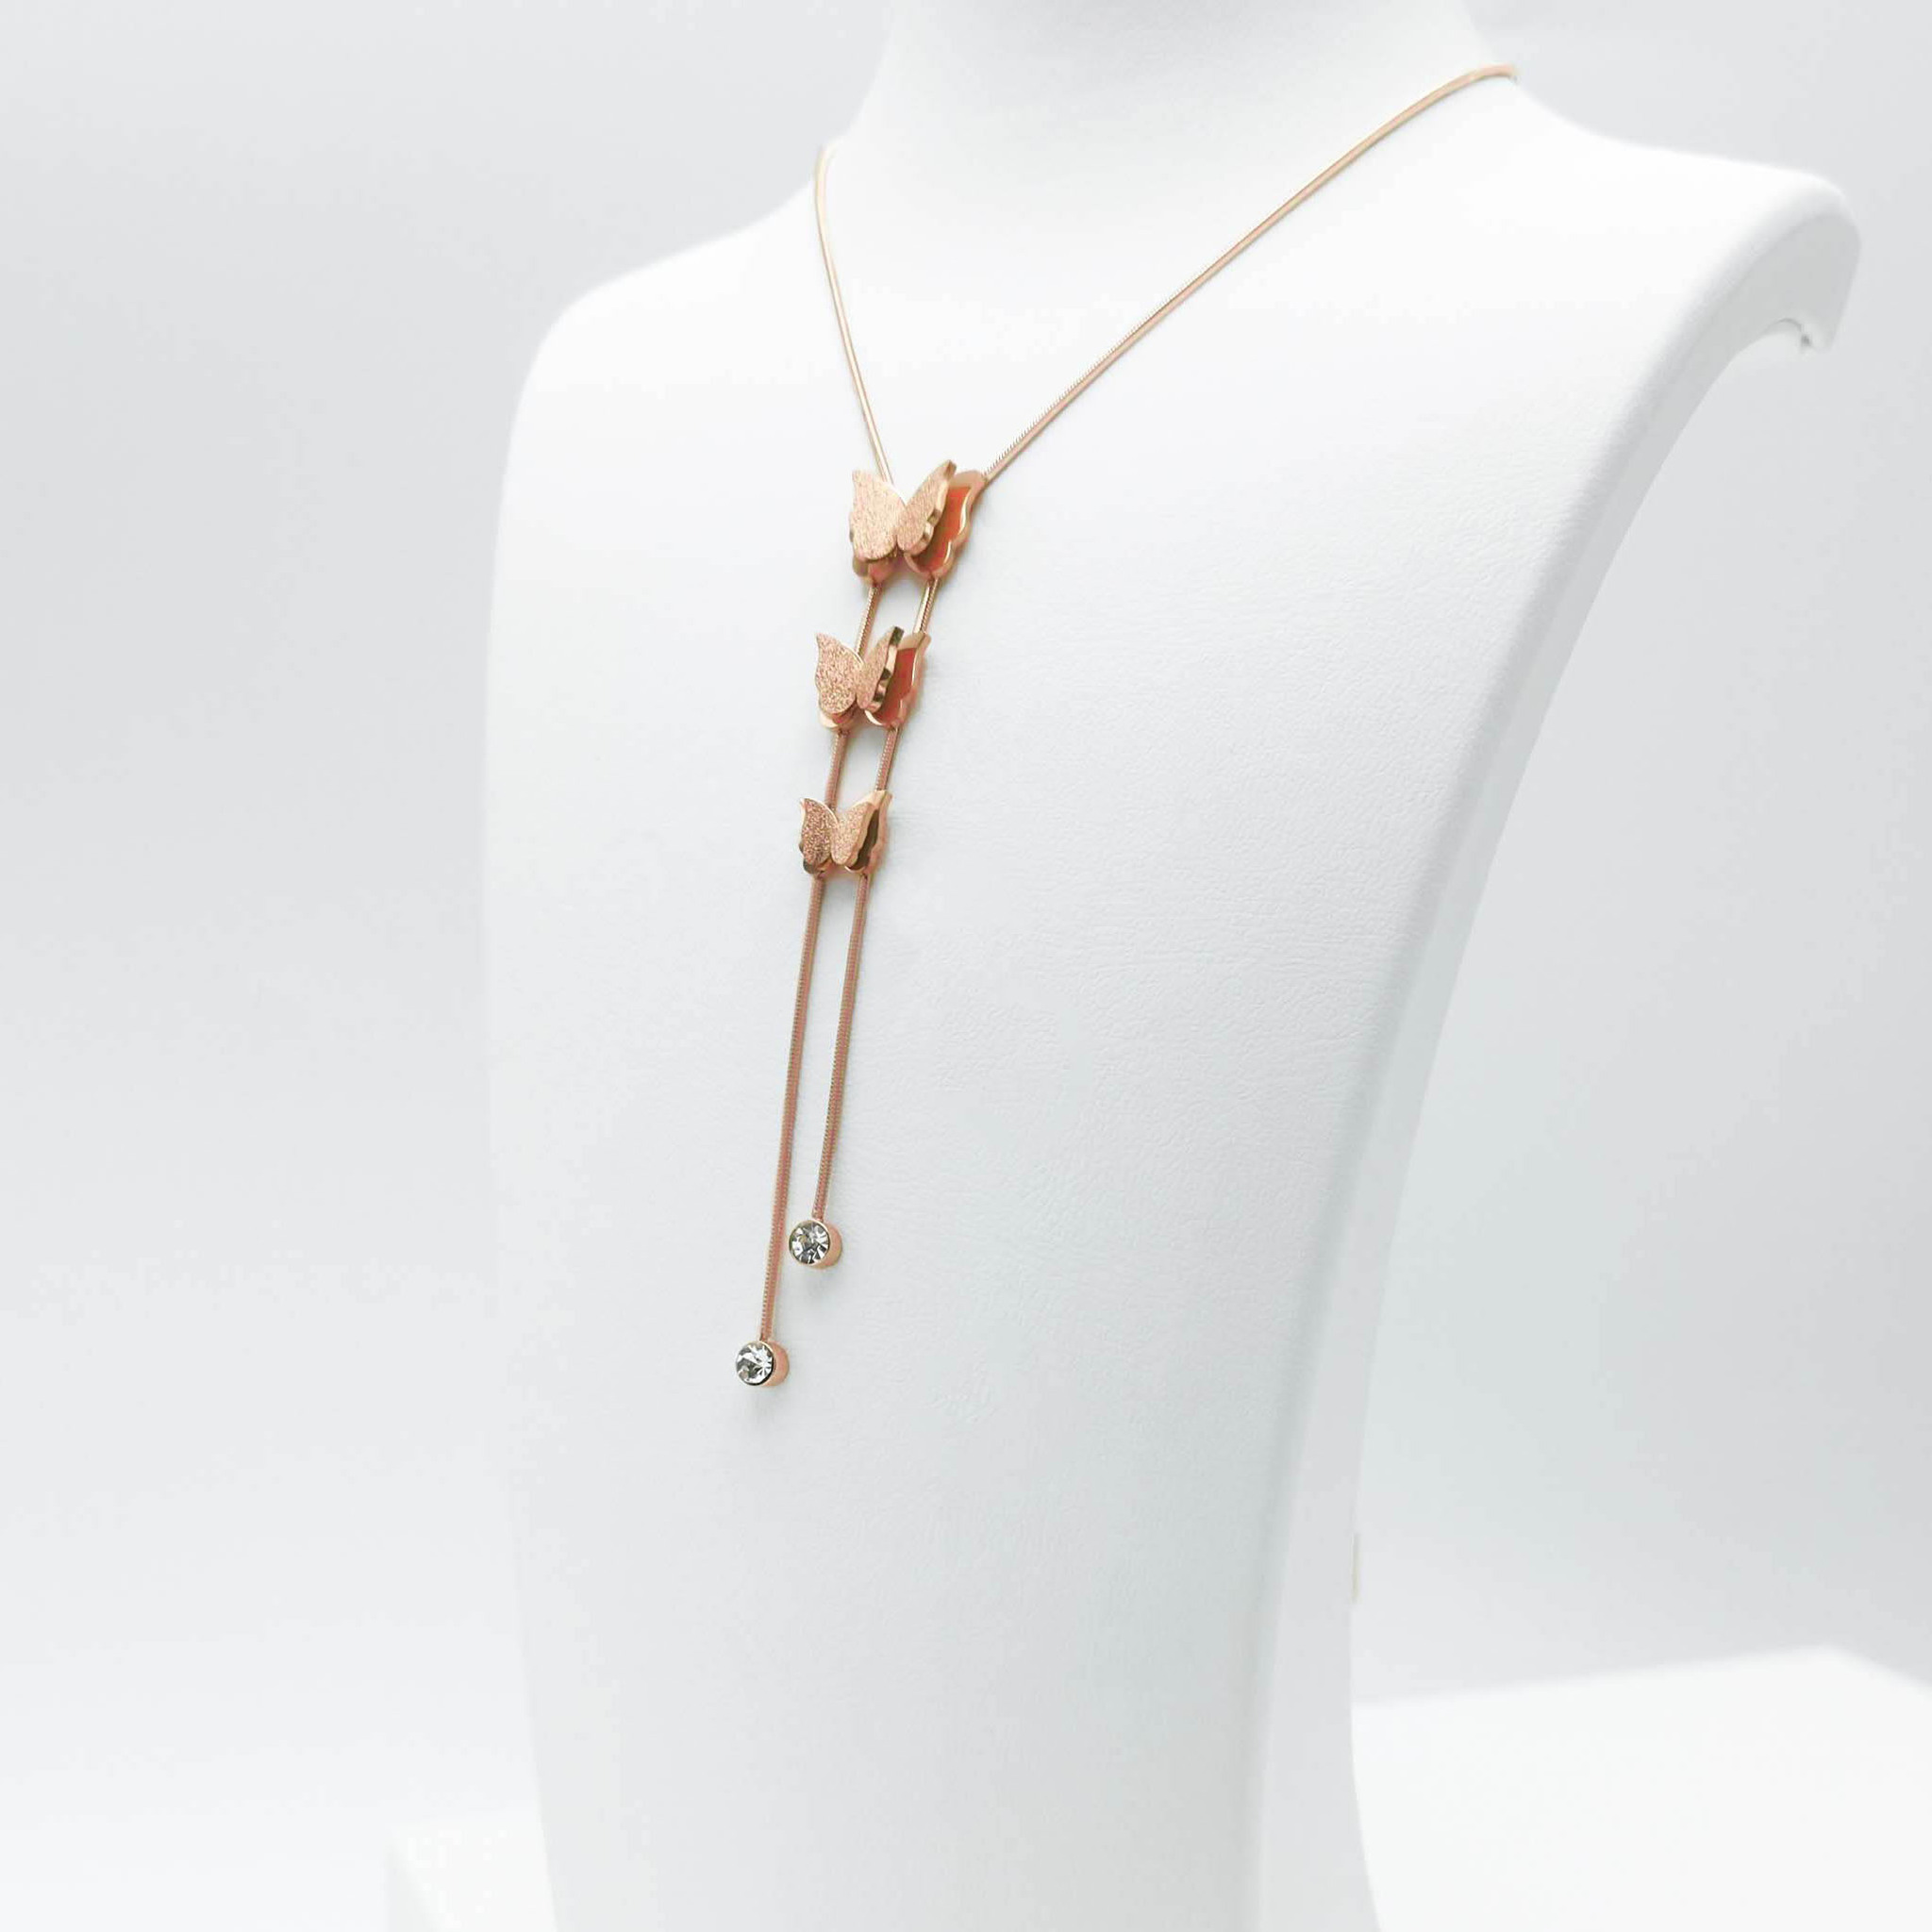 2- Butterfly Evolution Halsband Modern and trendy Necklace and women jewelry and accessories from SWEVALI fashion Sweden